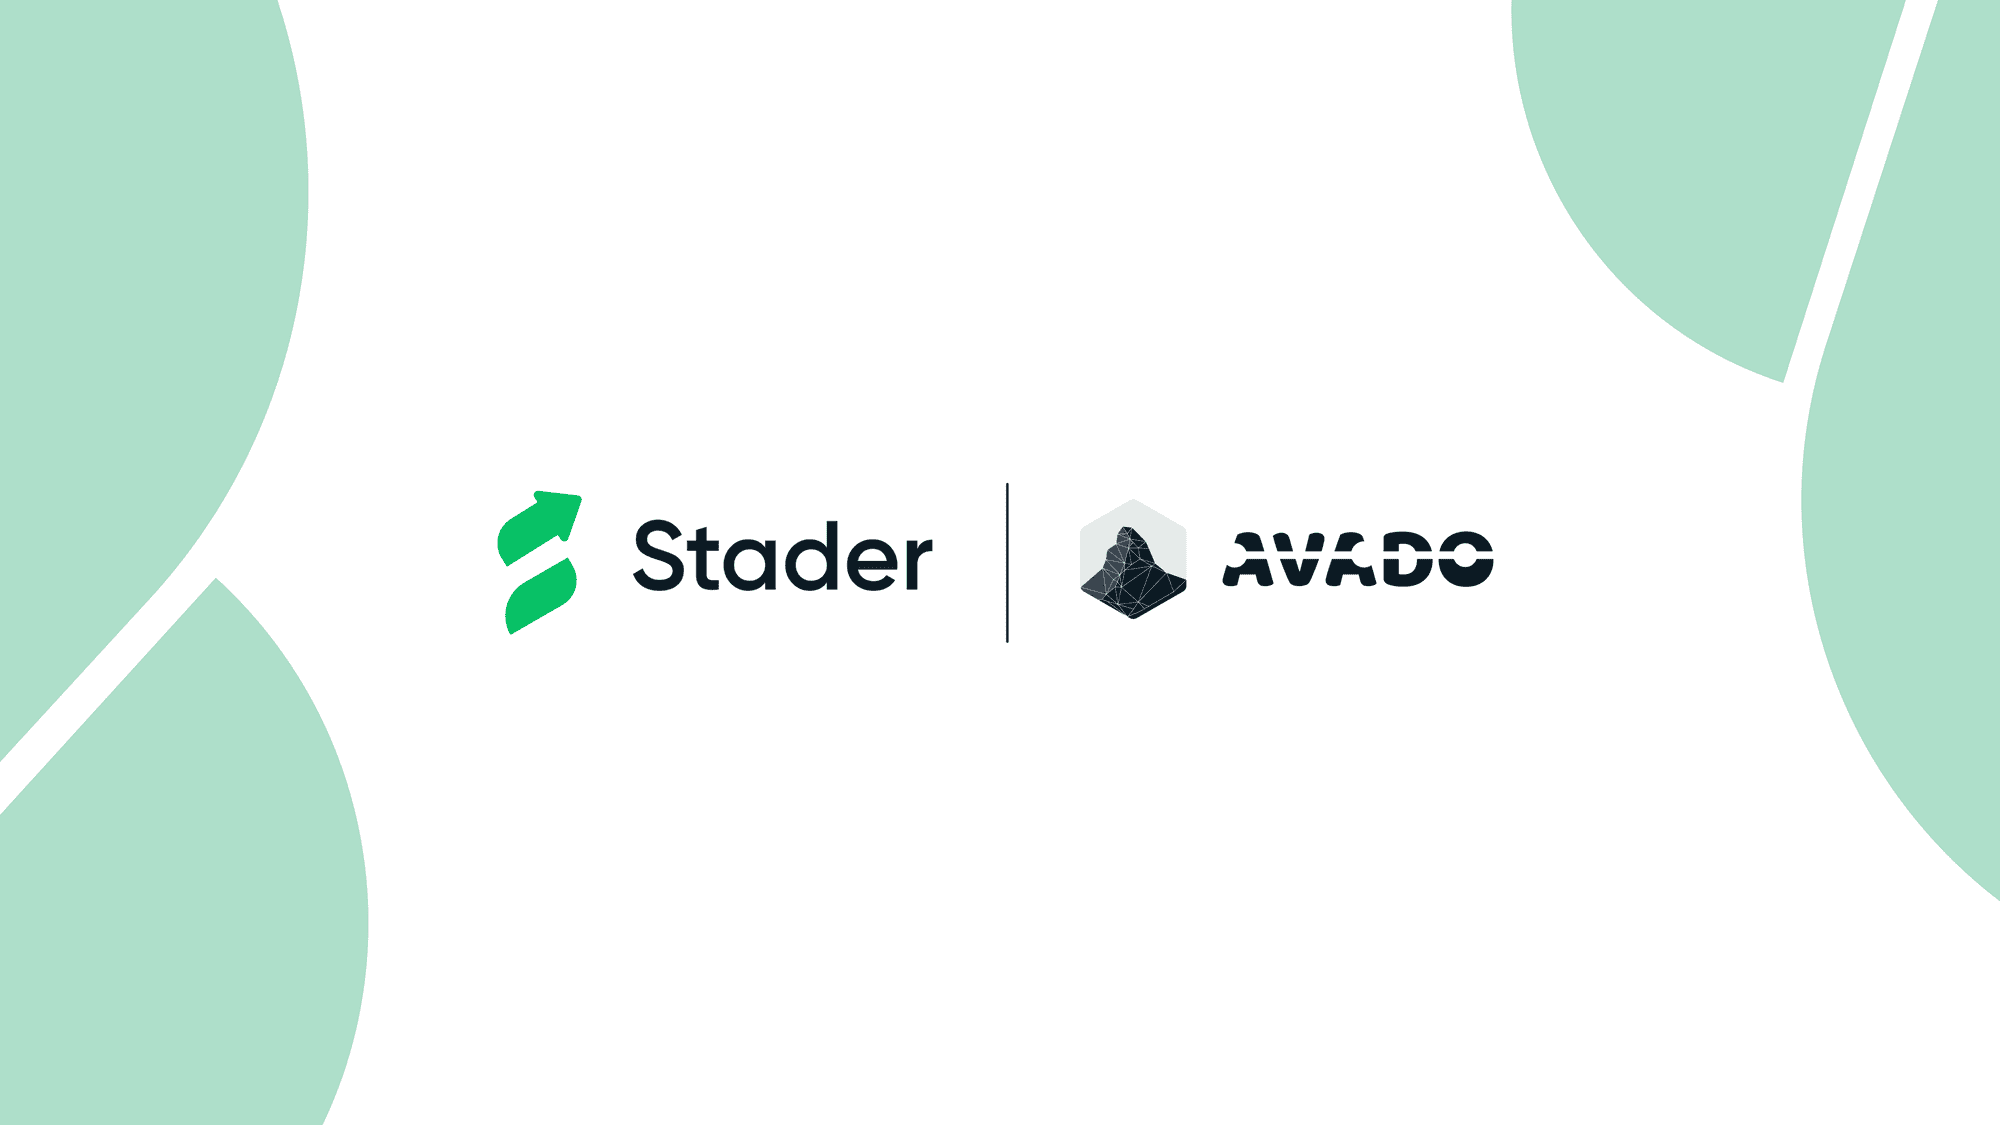 Stader and Avado: Simplifying ETH Staking